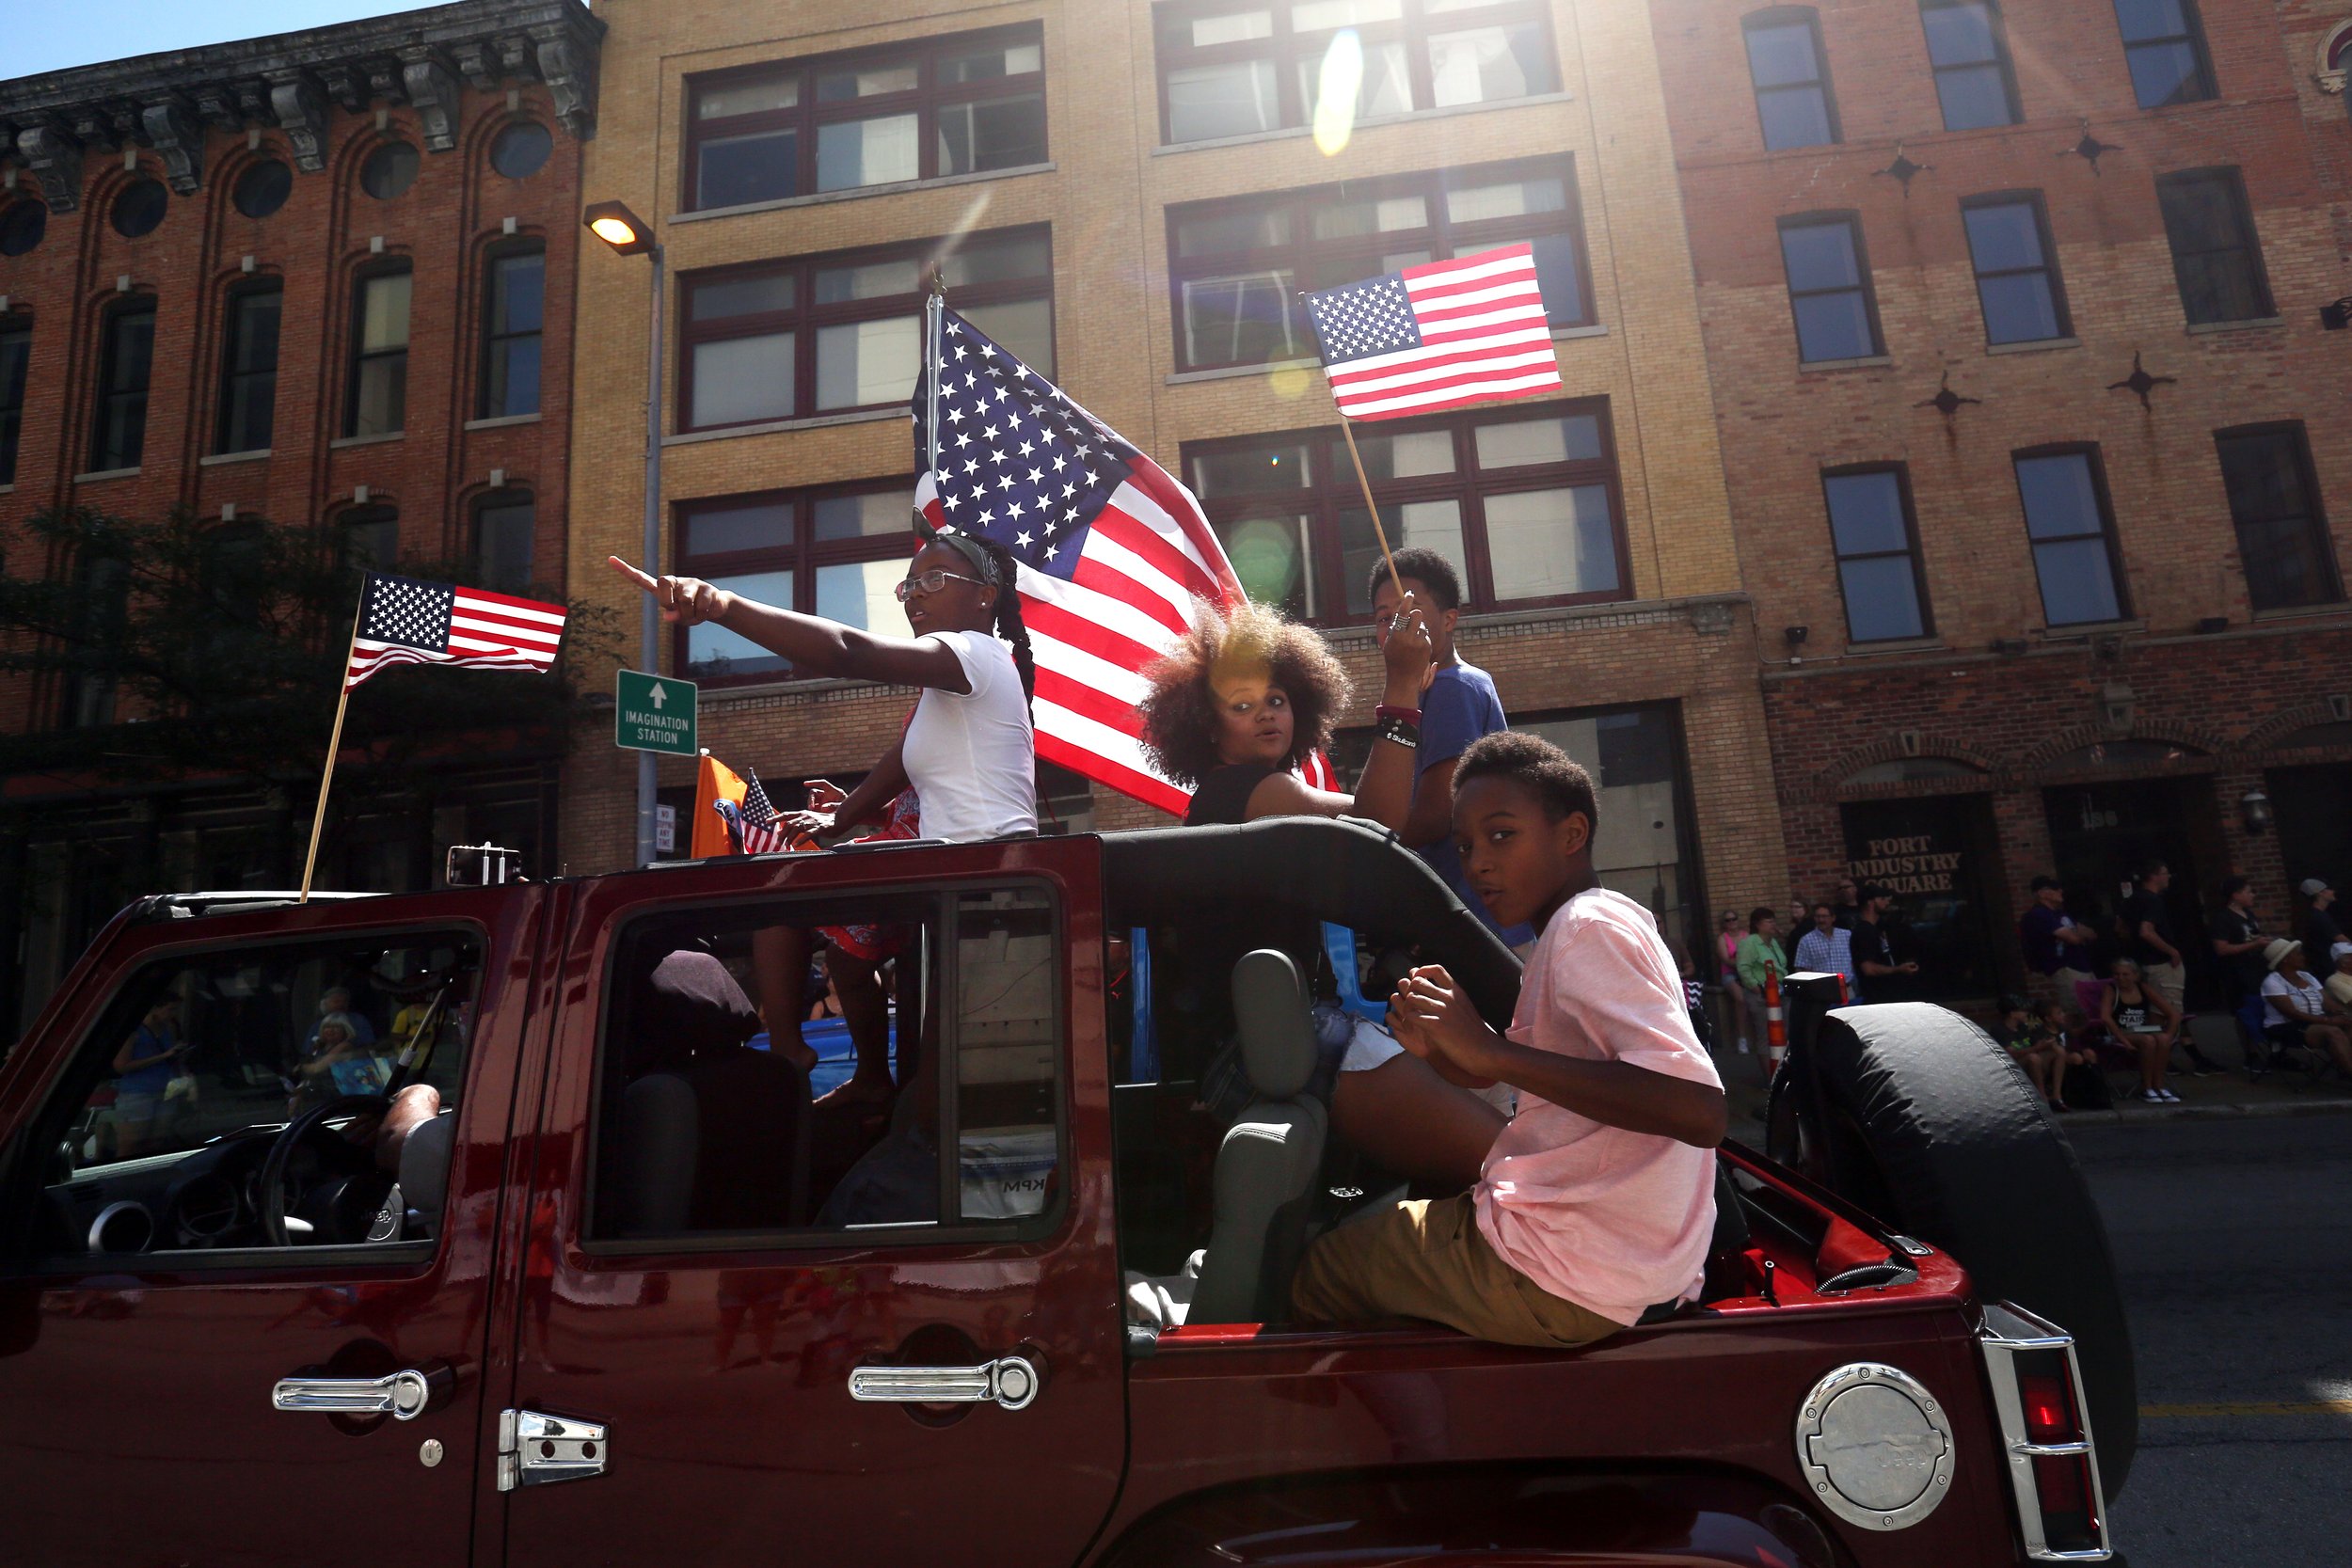  A Jeep rolls by with cheering riders at the second Toledo Jeep Fest parade in downtown Toledo, Ohio, on Saturday, August 11, 2018. More than 1,300 Jeeps rolled through downtown in the parade, and the afternoon included food, live music, Jeeps parked